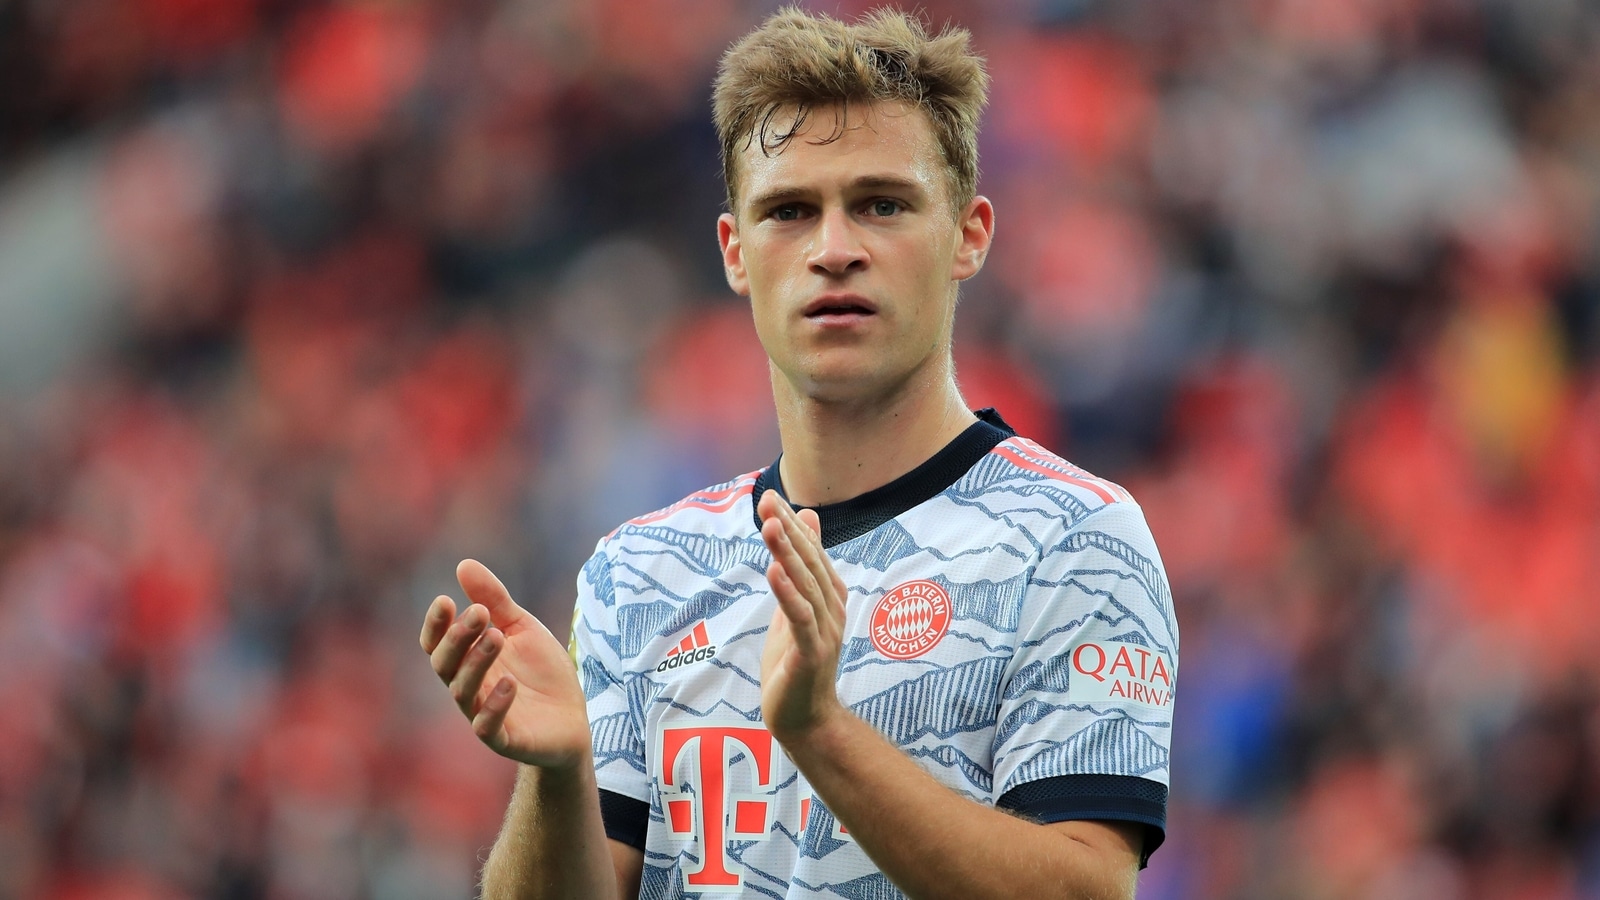 Joshua Kimmich would also bring a sense of leadership in case his potential Liverpool move materialises.